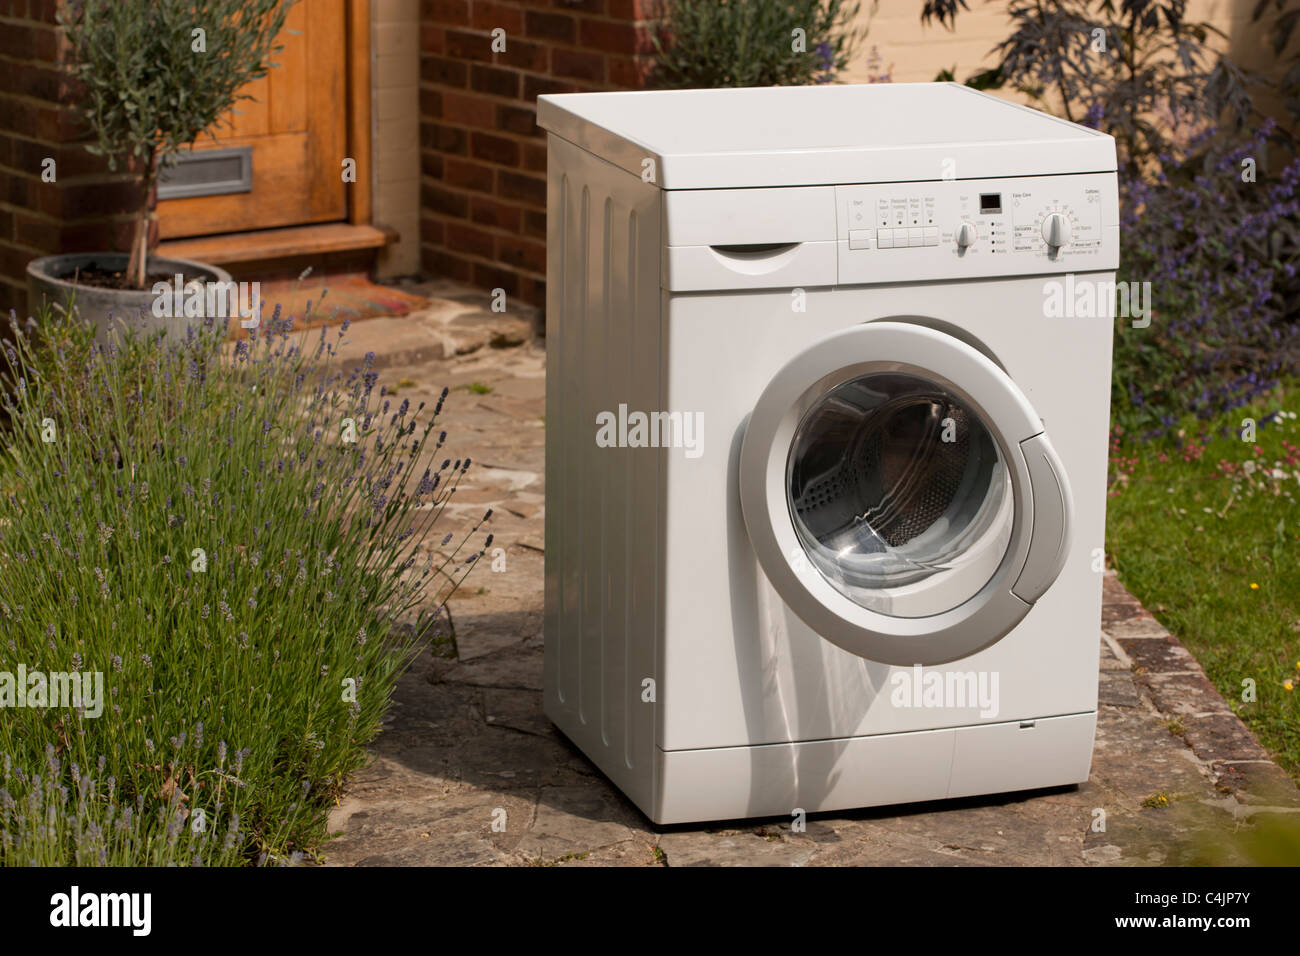 Washing machine delivered outside the house Stock Photo